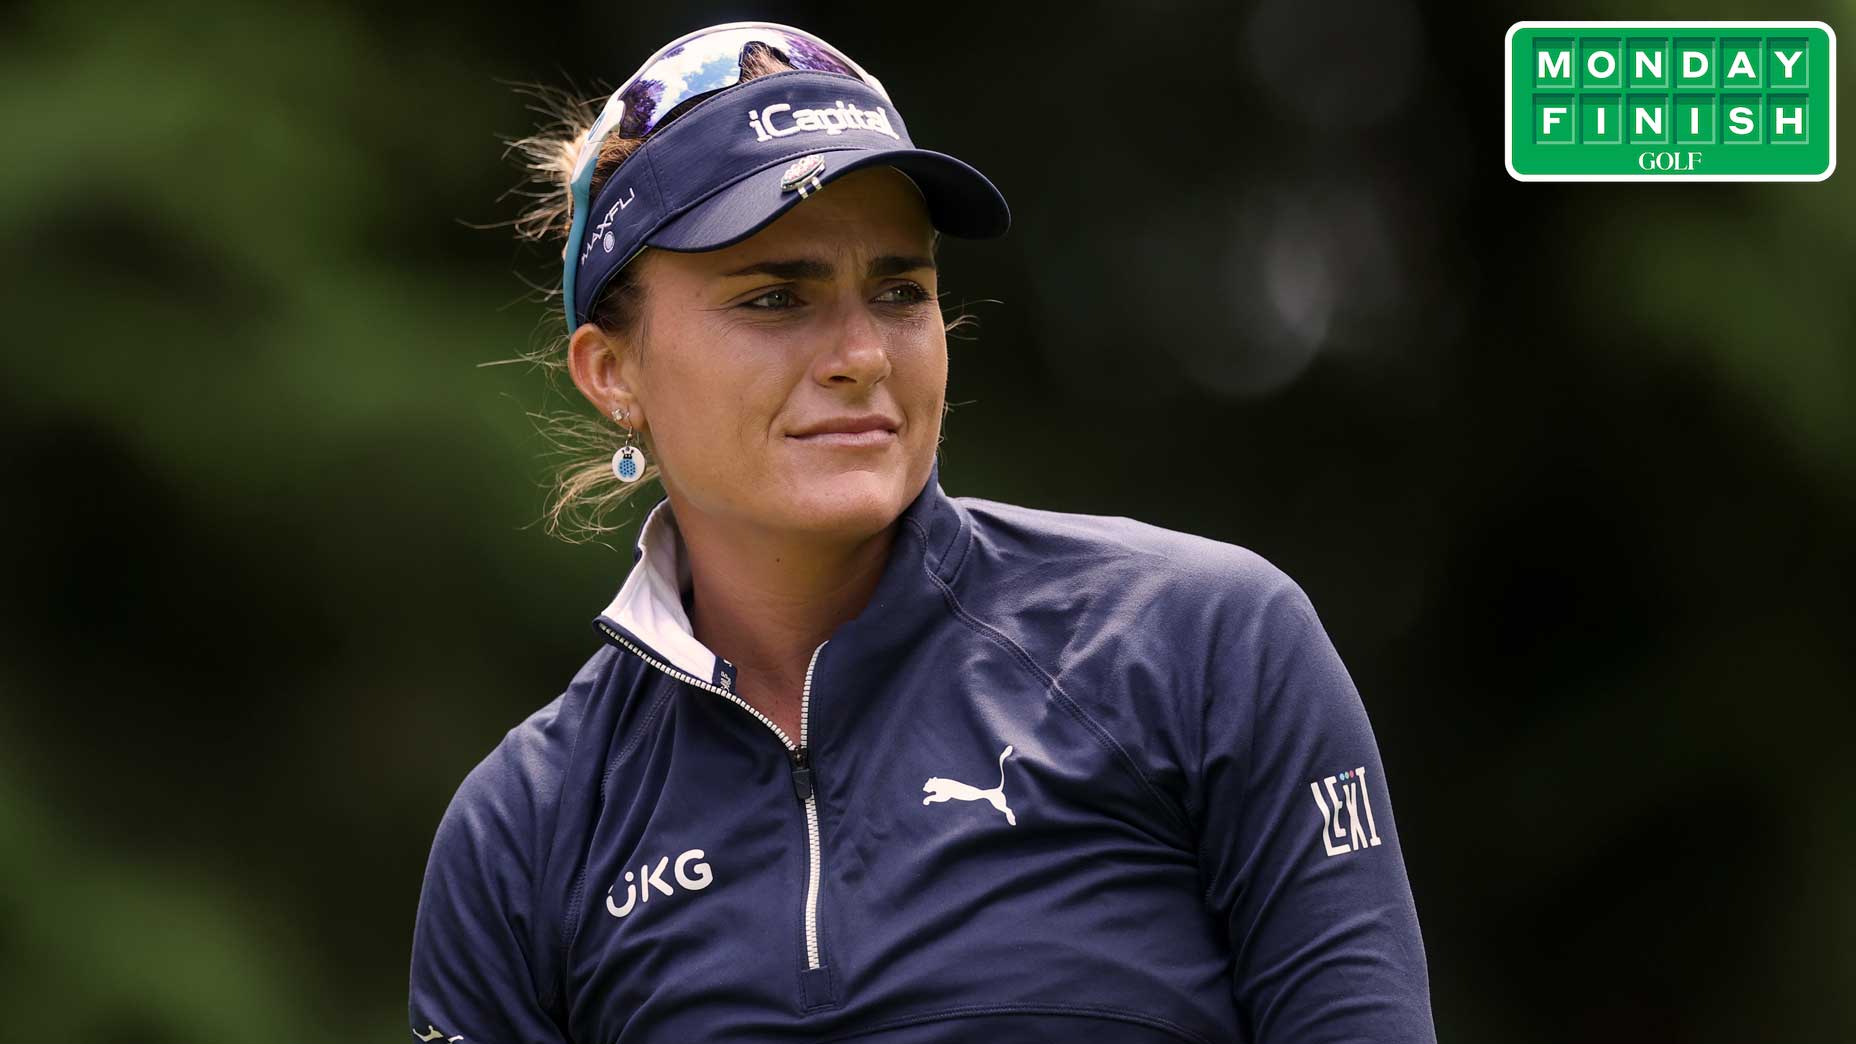 Lexi Thompson rode the golfing rollercoaster this weekend.